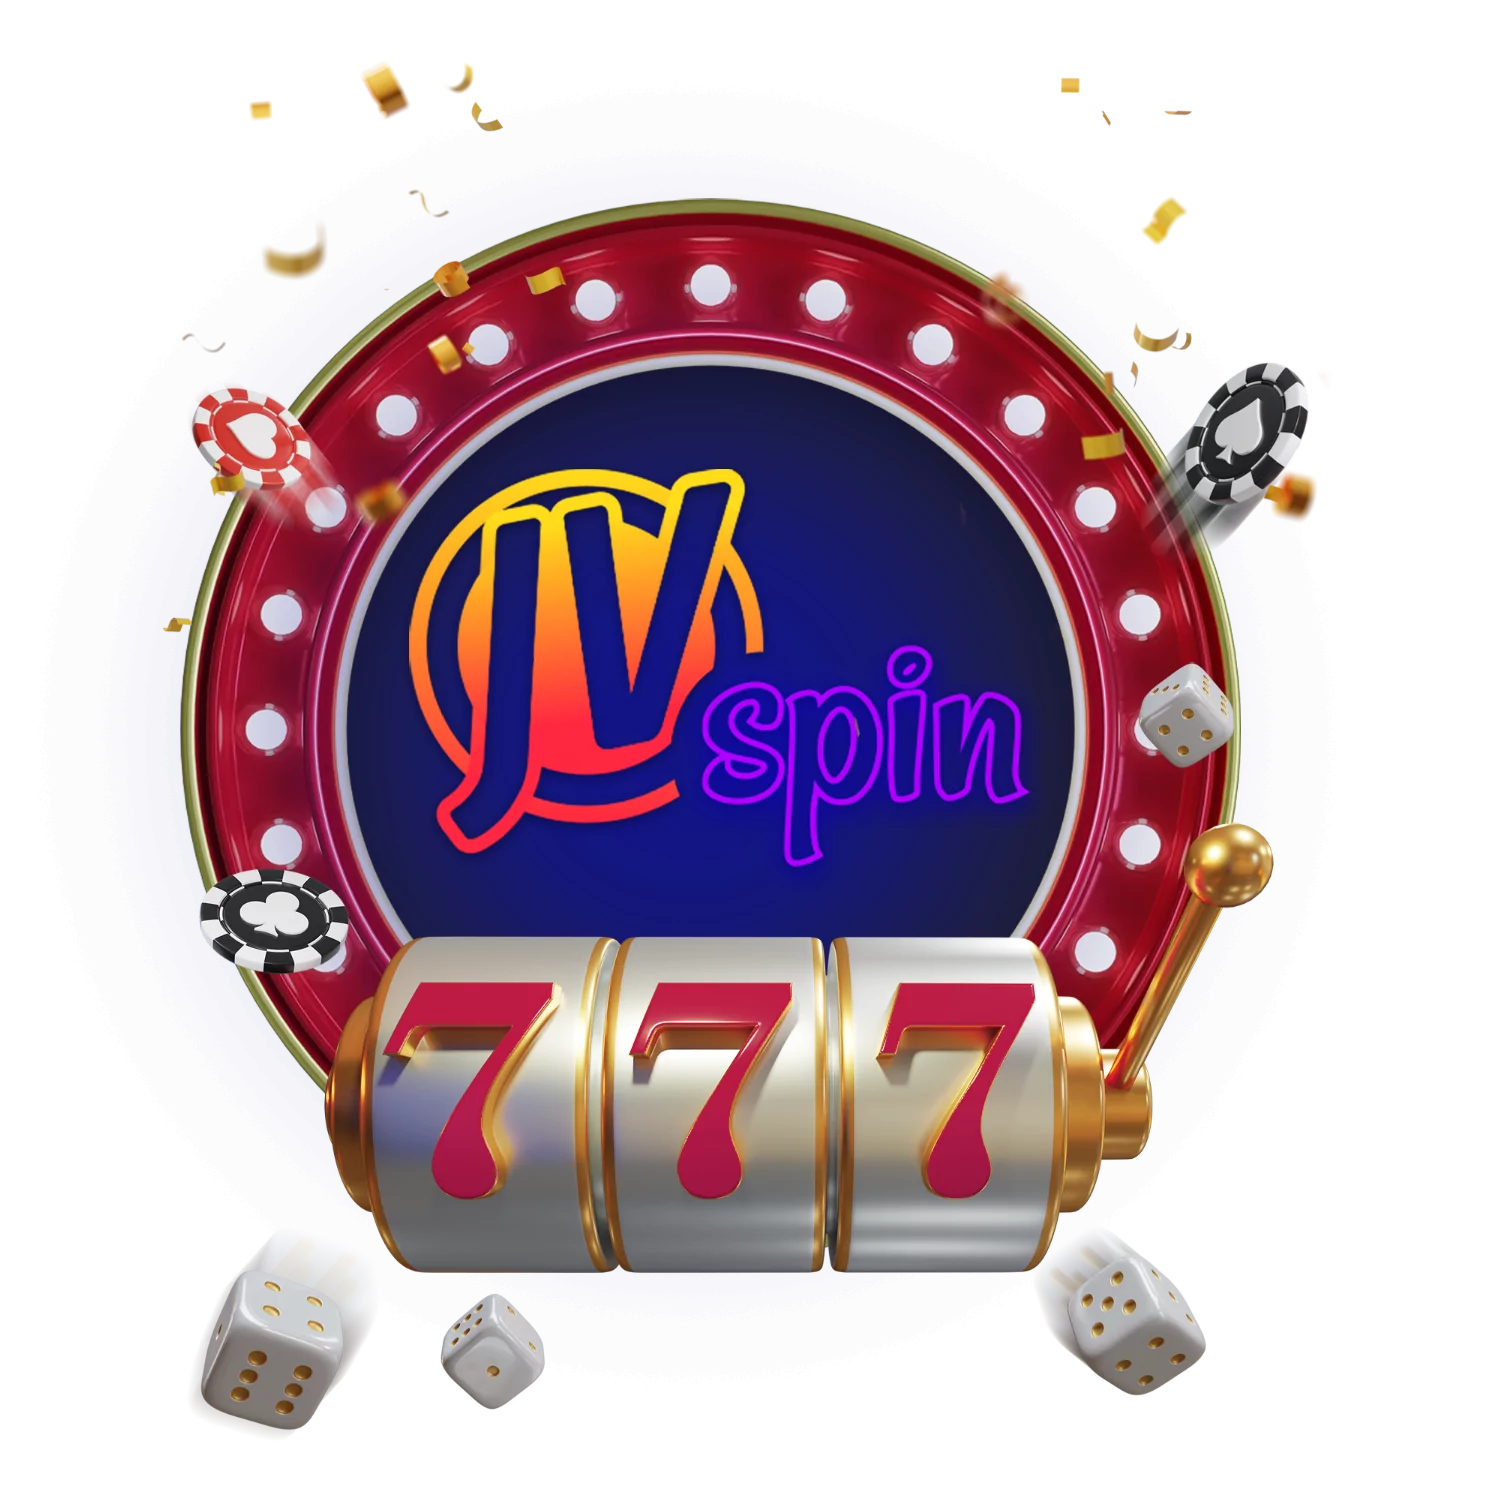 Learn how to play slots and online games on the JVSpin Casino.